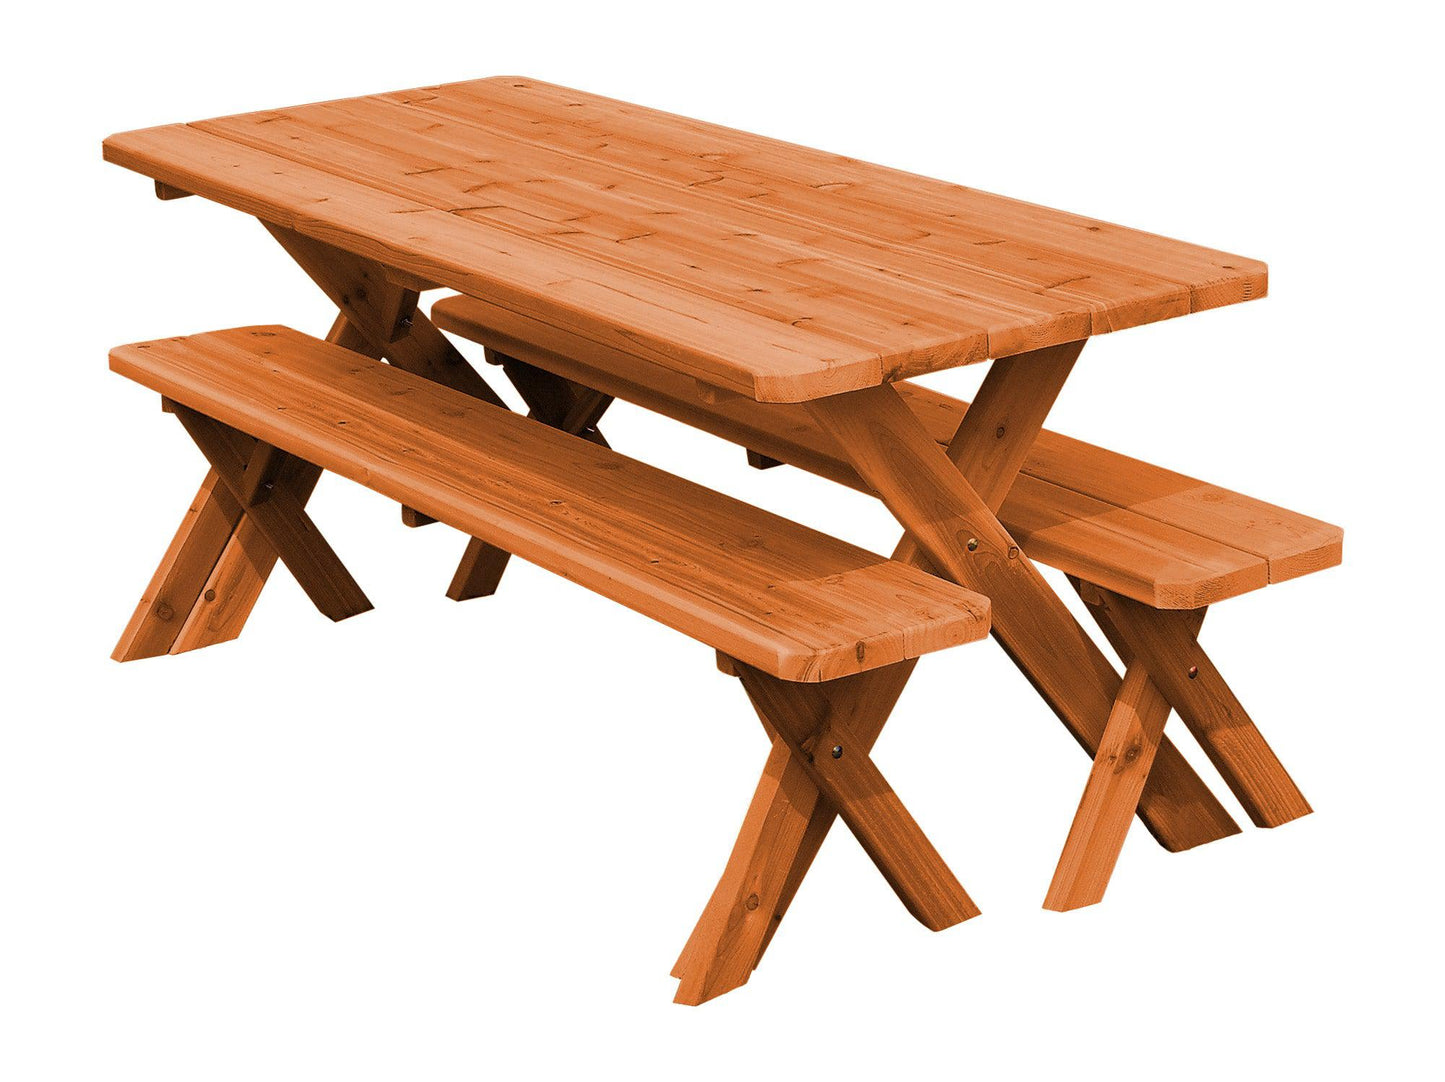 A&L FURNITURE CO. Western Red Cedar 8' Cross-leg Picnic Table w/4  4' Benches - Specify for FREE 2" Umbrella Hole - LEAD TIME TO SHIP 2 WEEKS